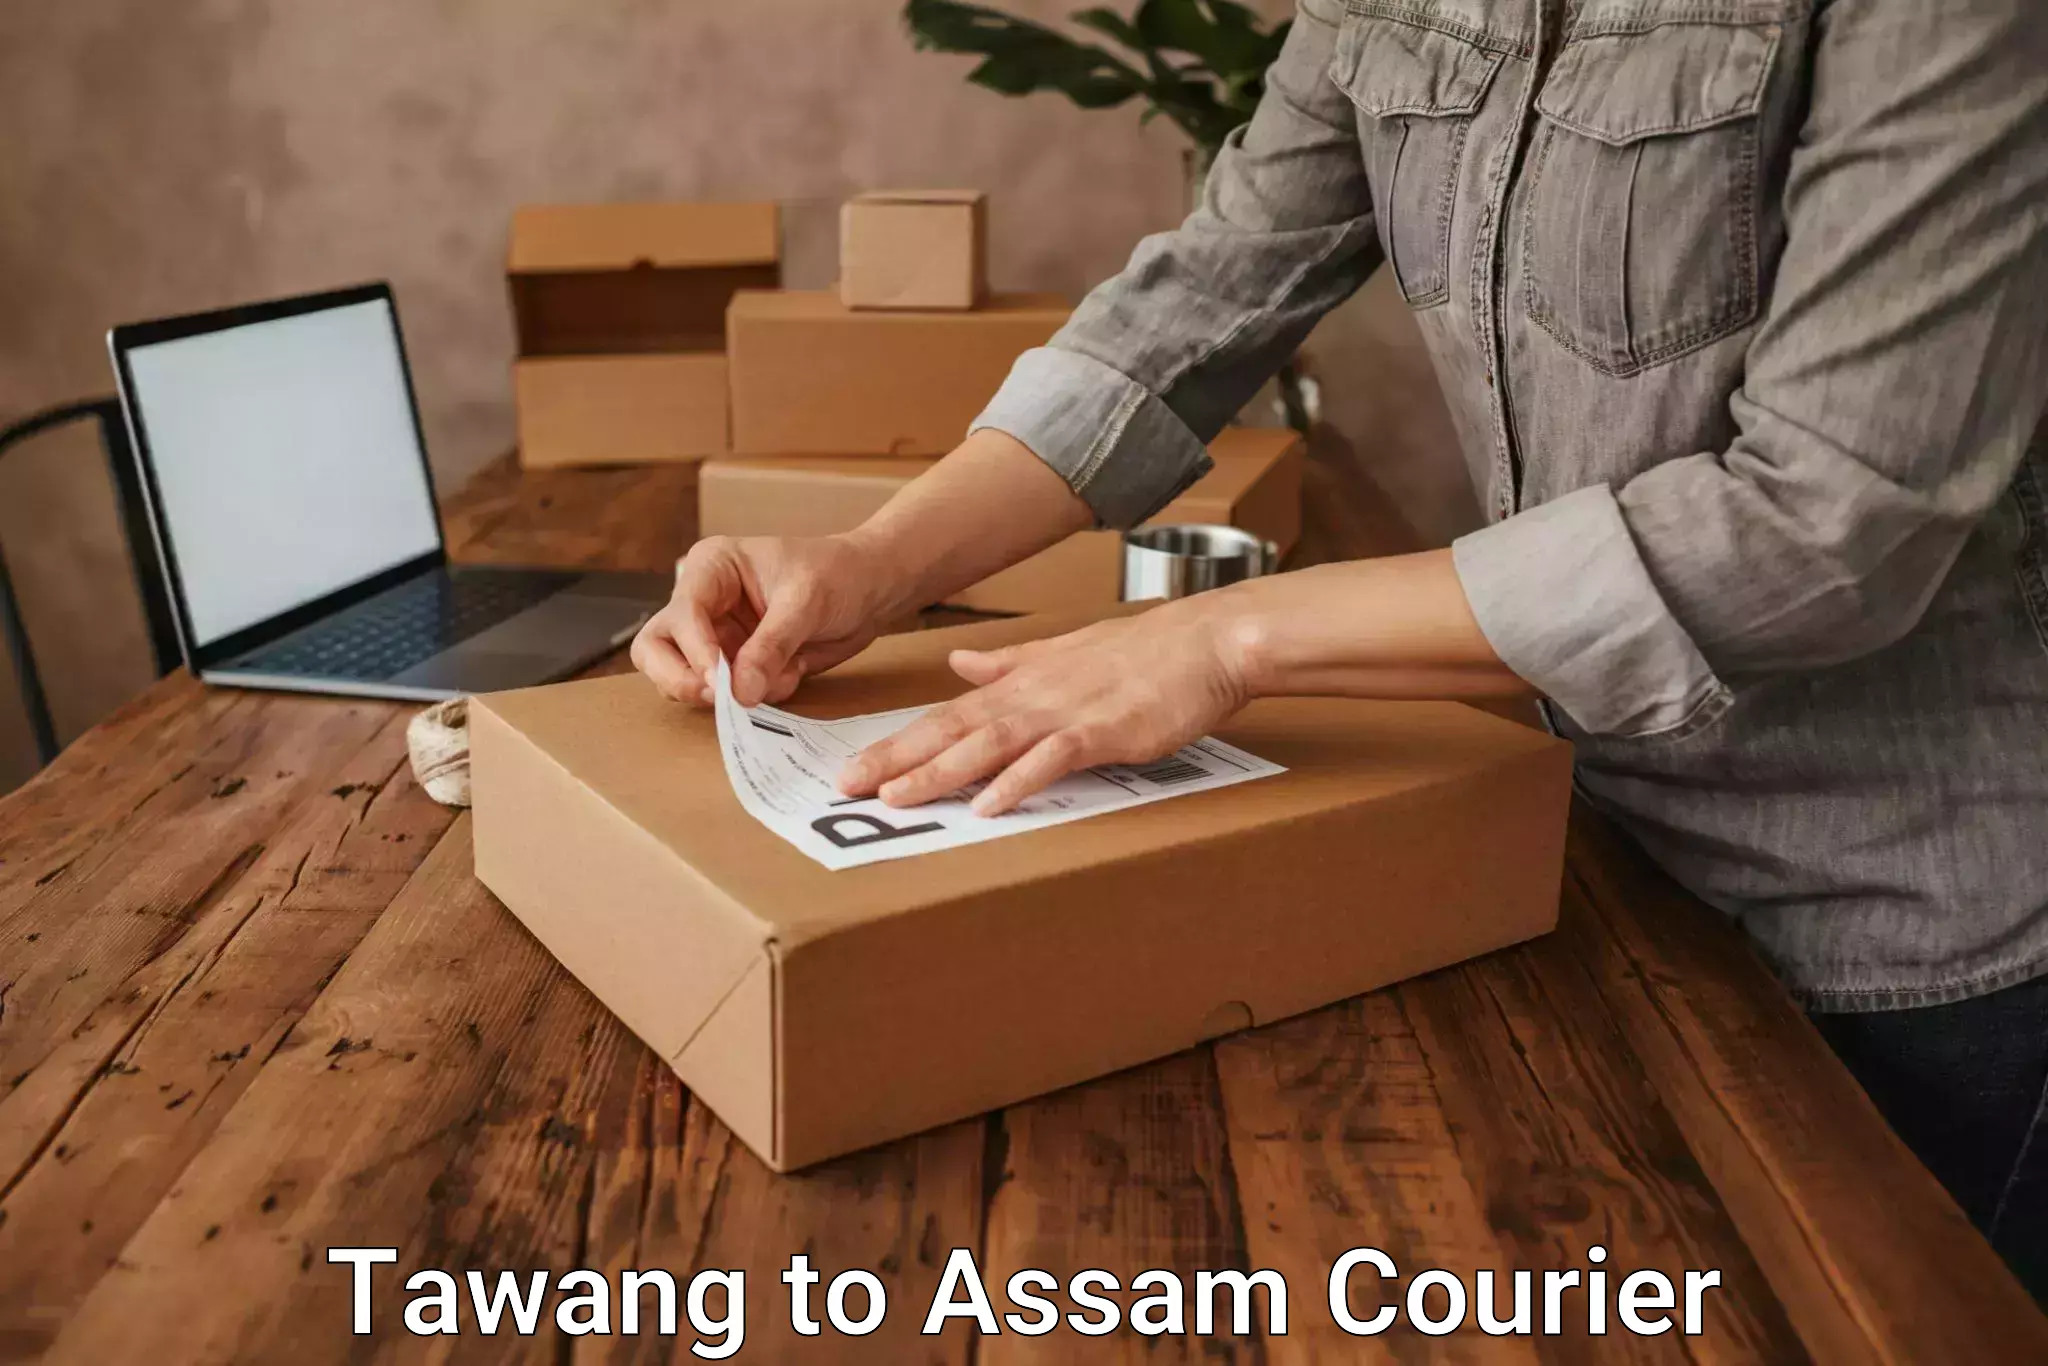 24-hour courier service Tawang to Udharbond